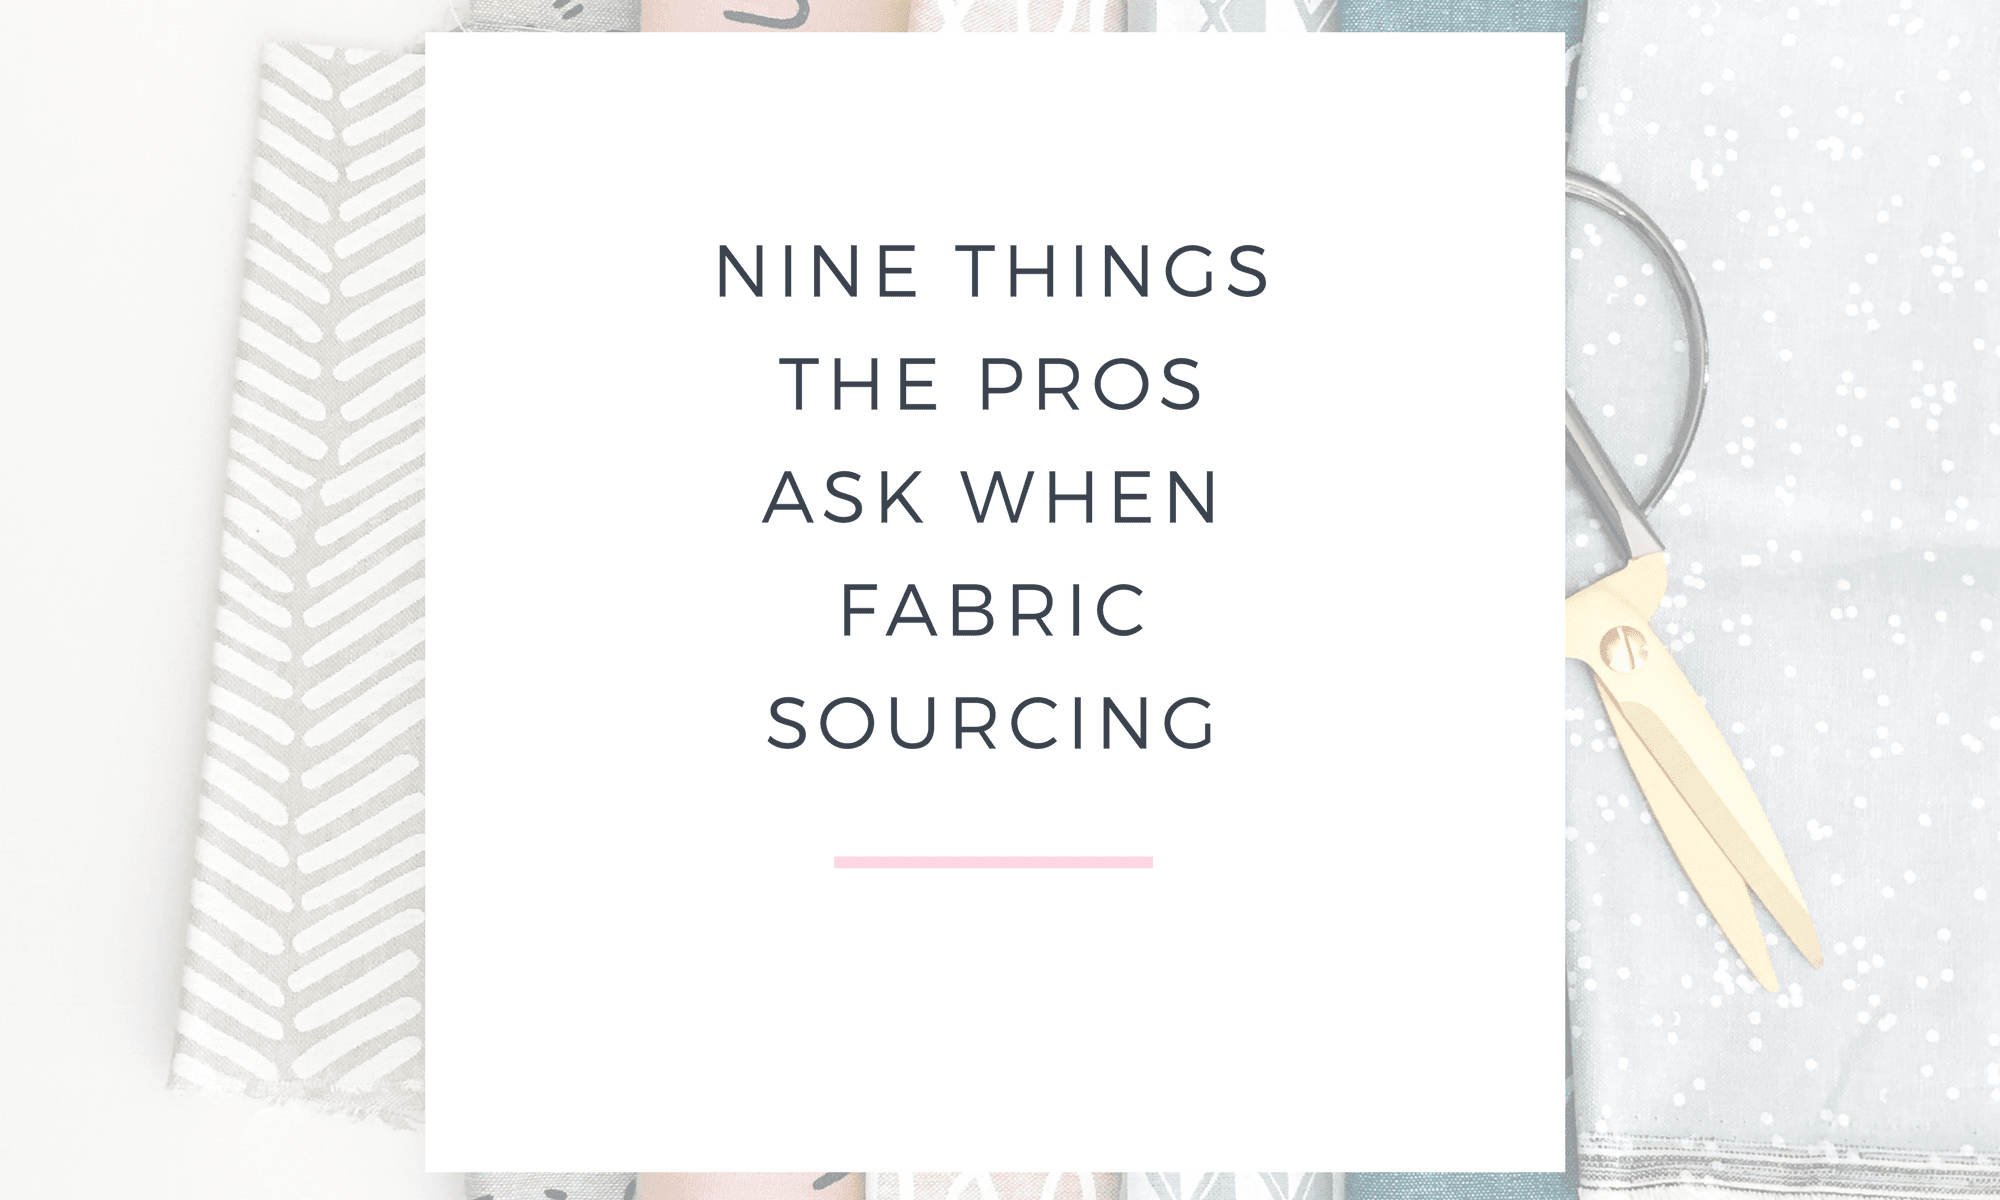 NINE THINGS THE PROS ASK WHEN FABRIC SOURCING